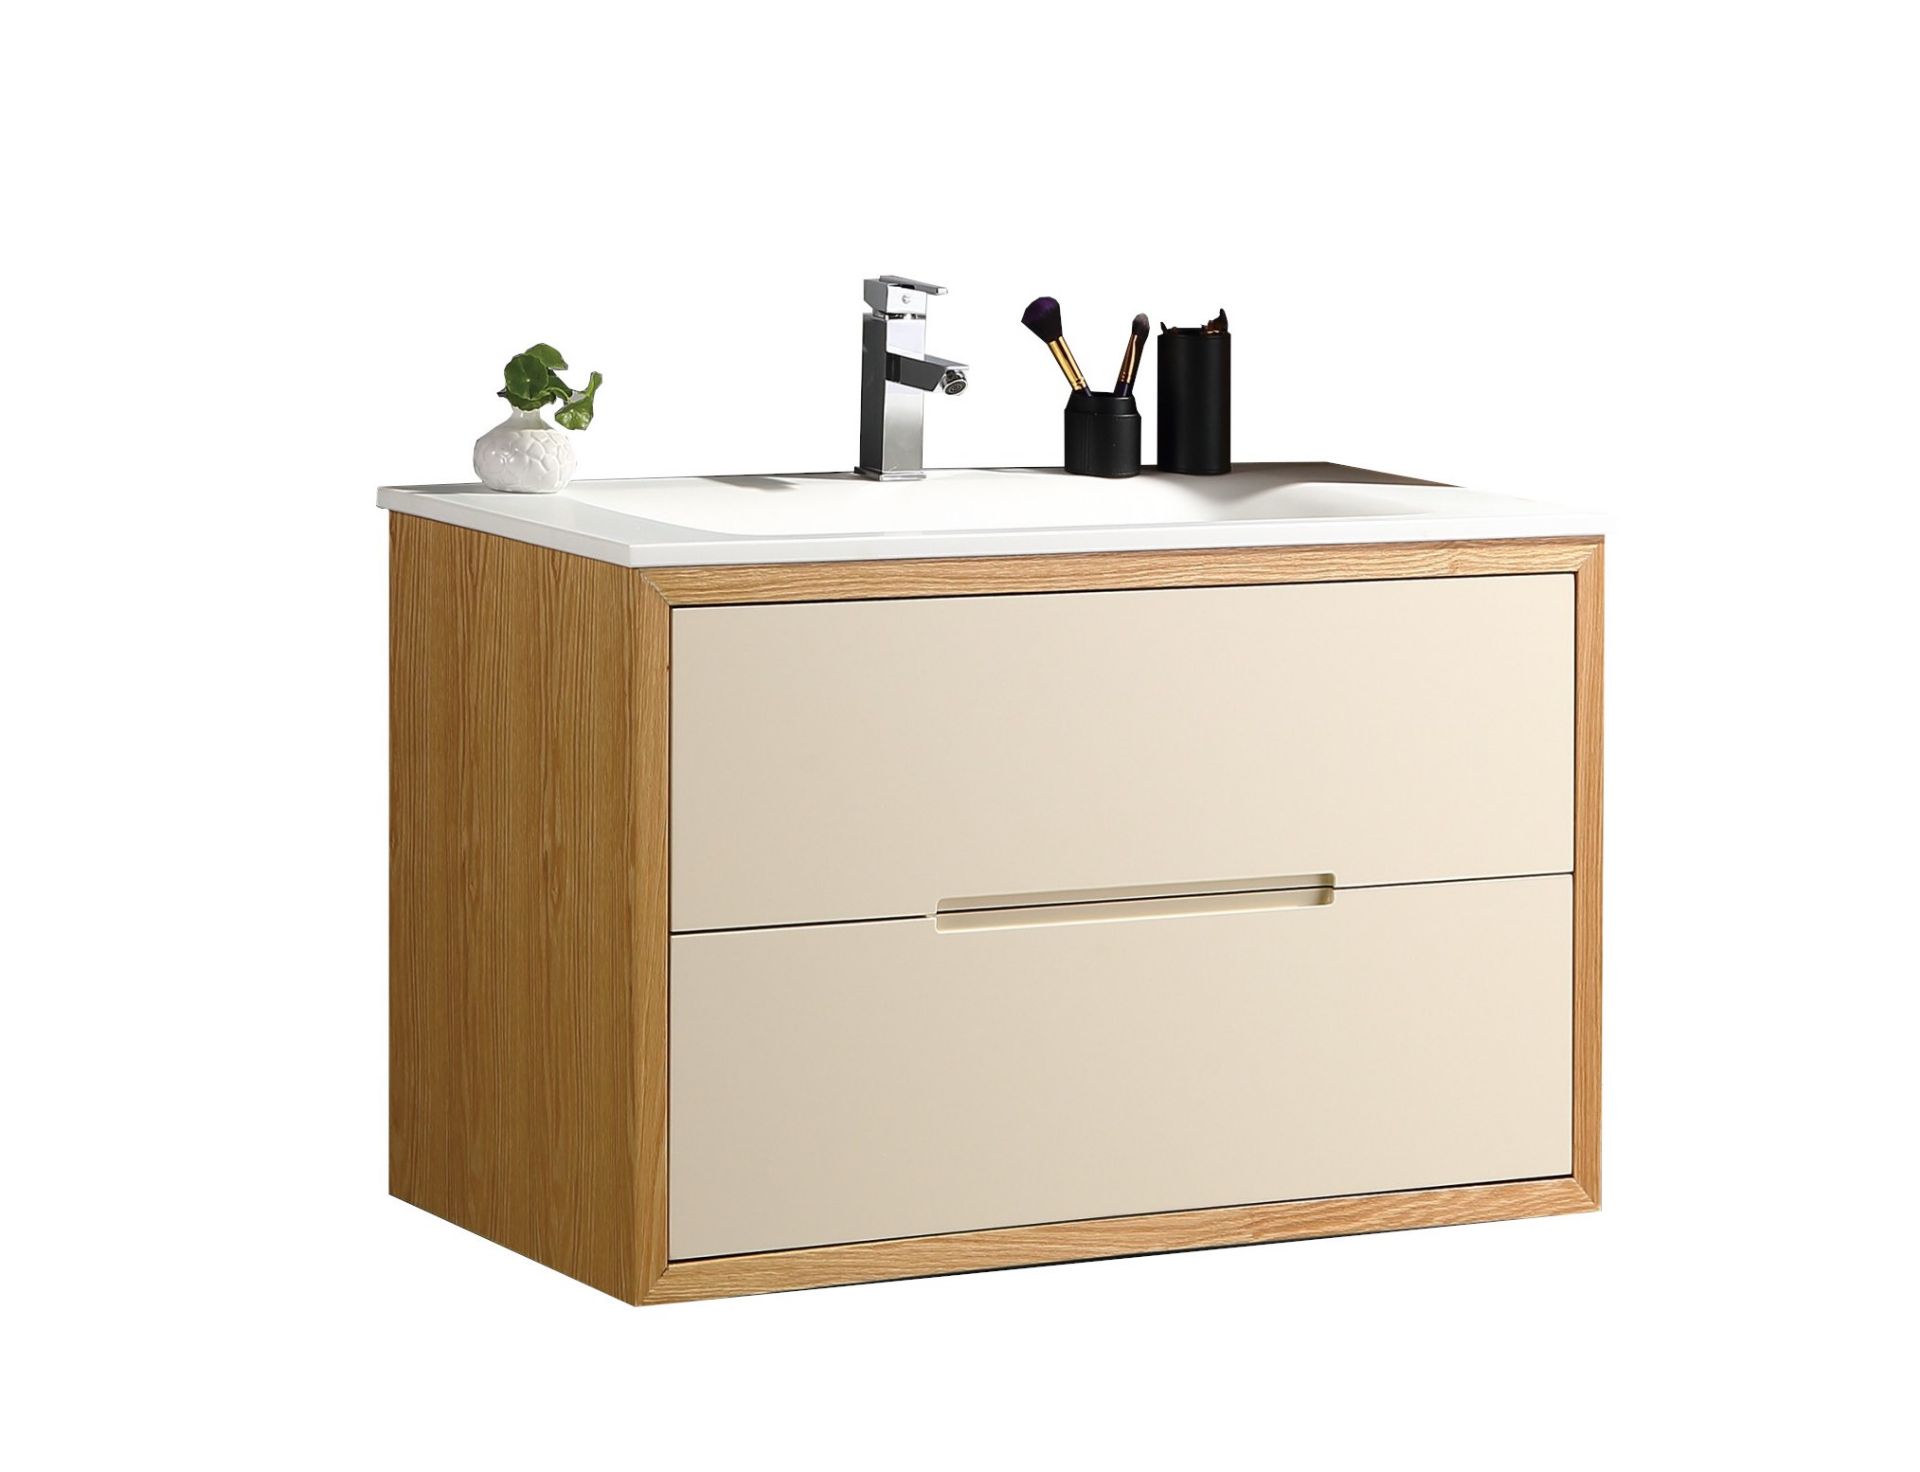 Complete Vanity Unit Set in Beige with fixtures and fittings RRP £799.99 *NO VAT* - Image 3 of 5